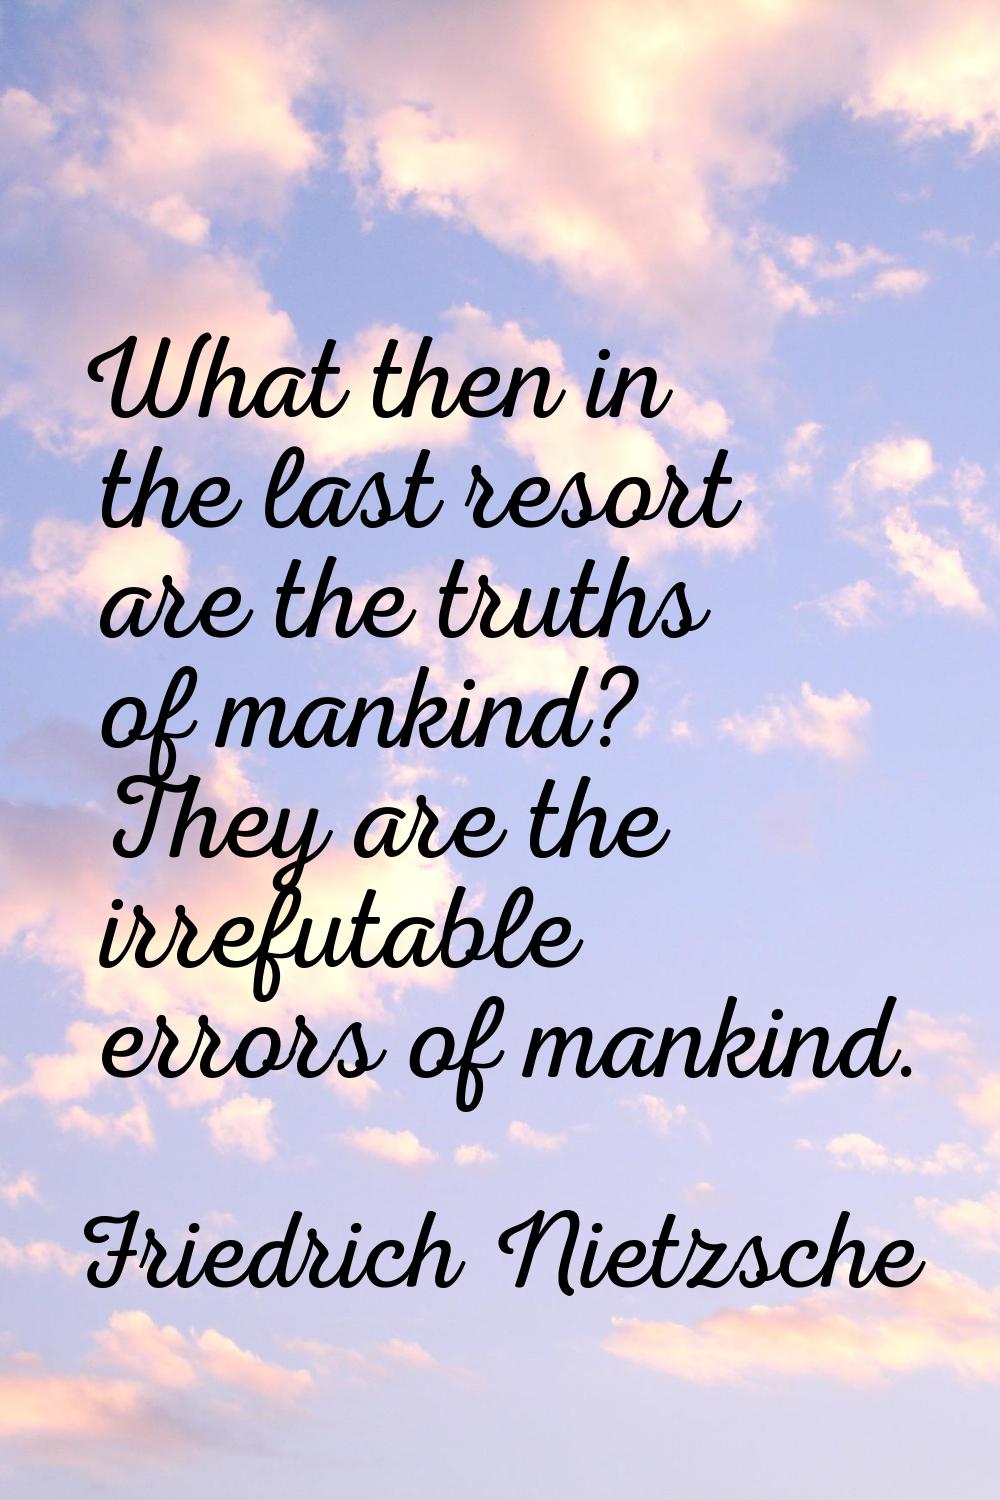 What then in the last resort are the truths of mankind? They are the irrefutable errors of mankind.